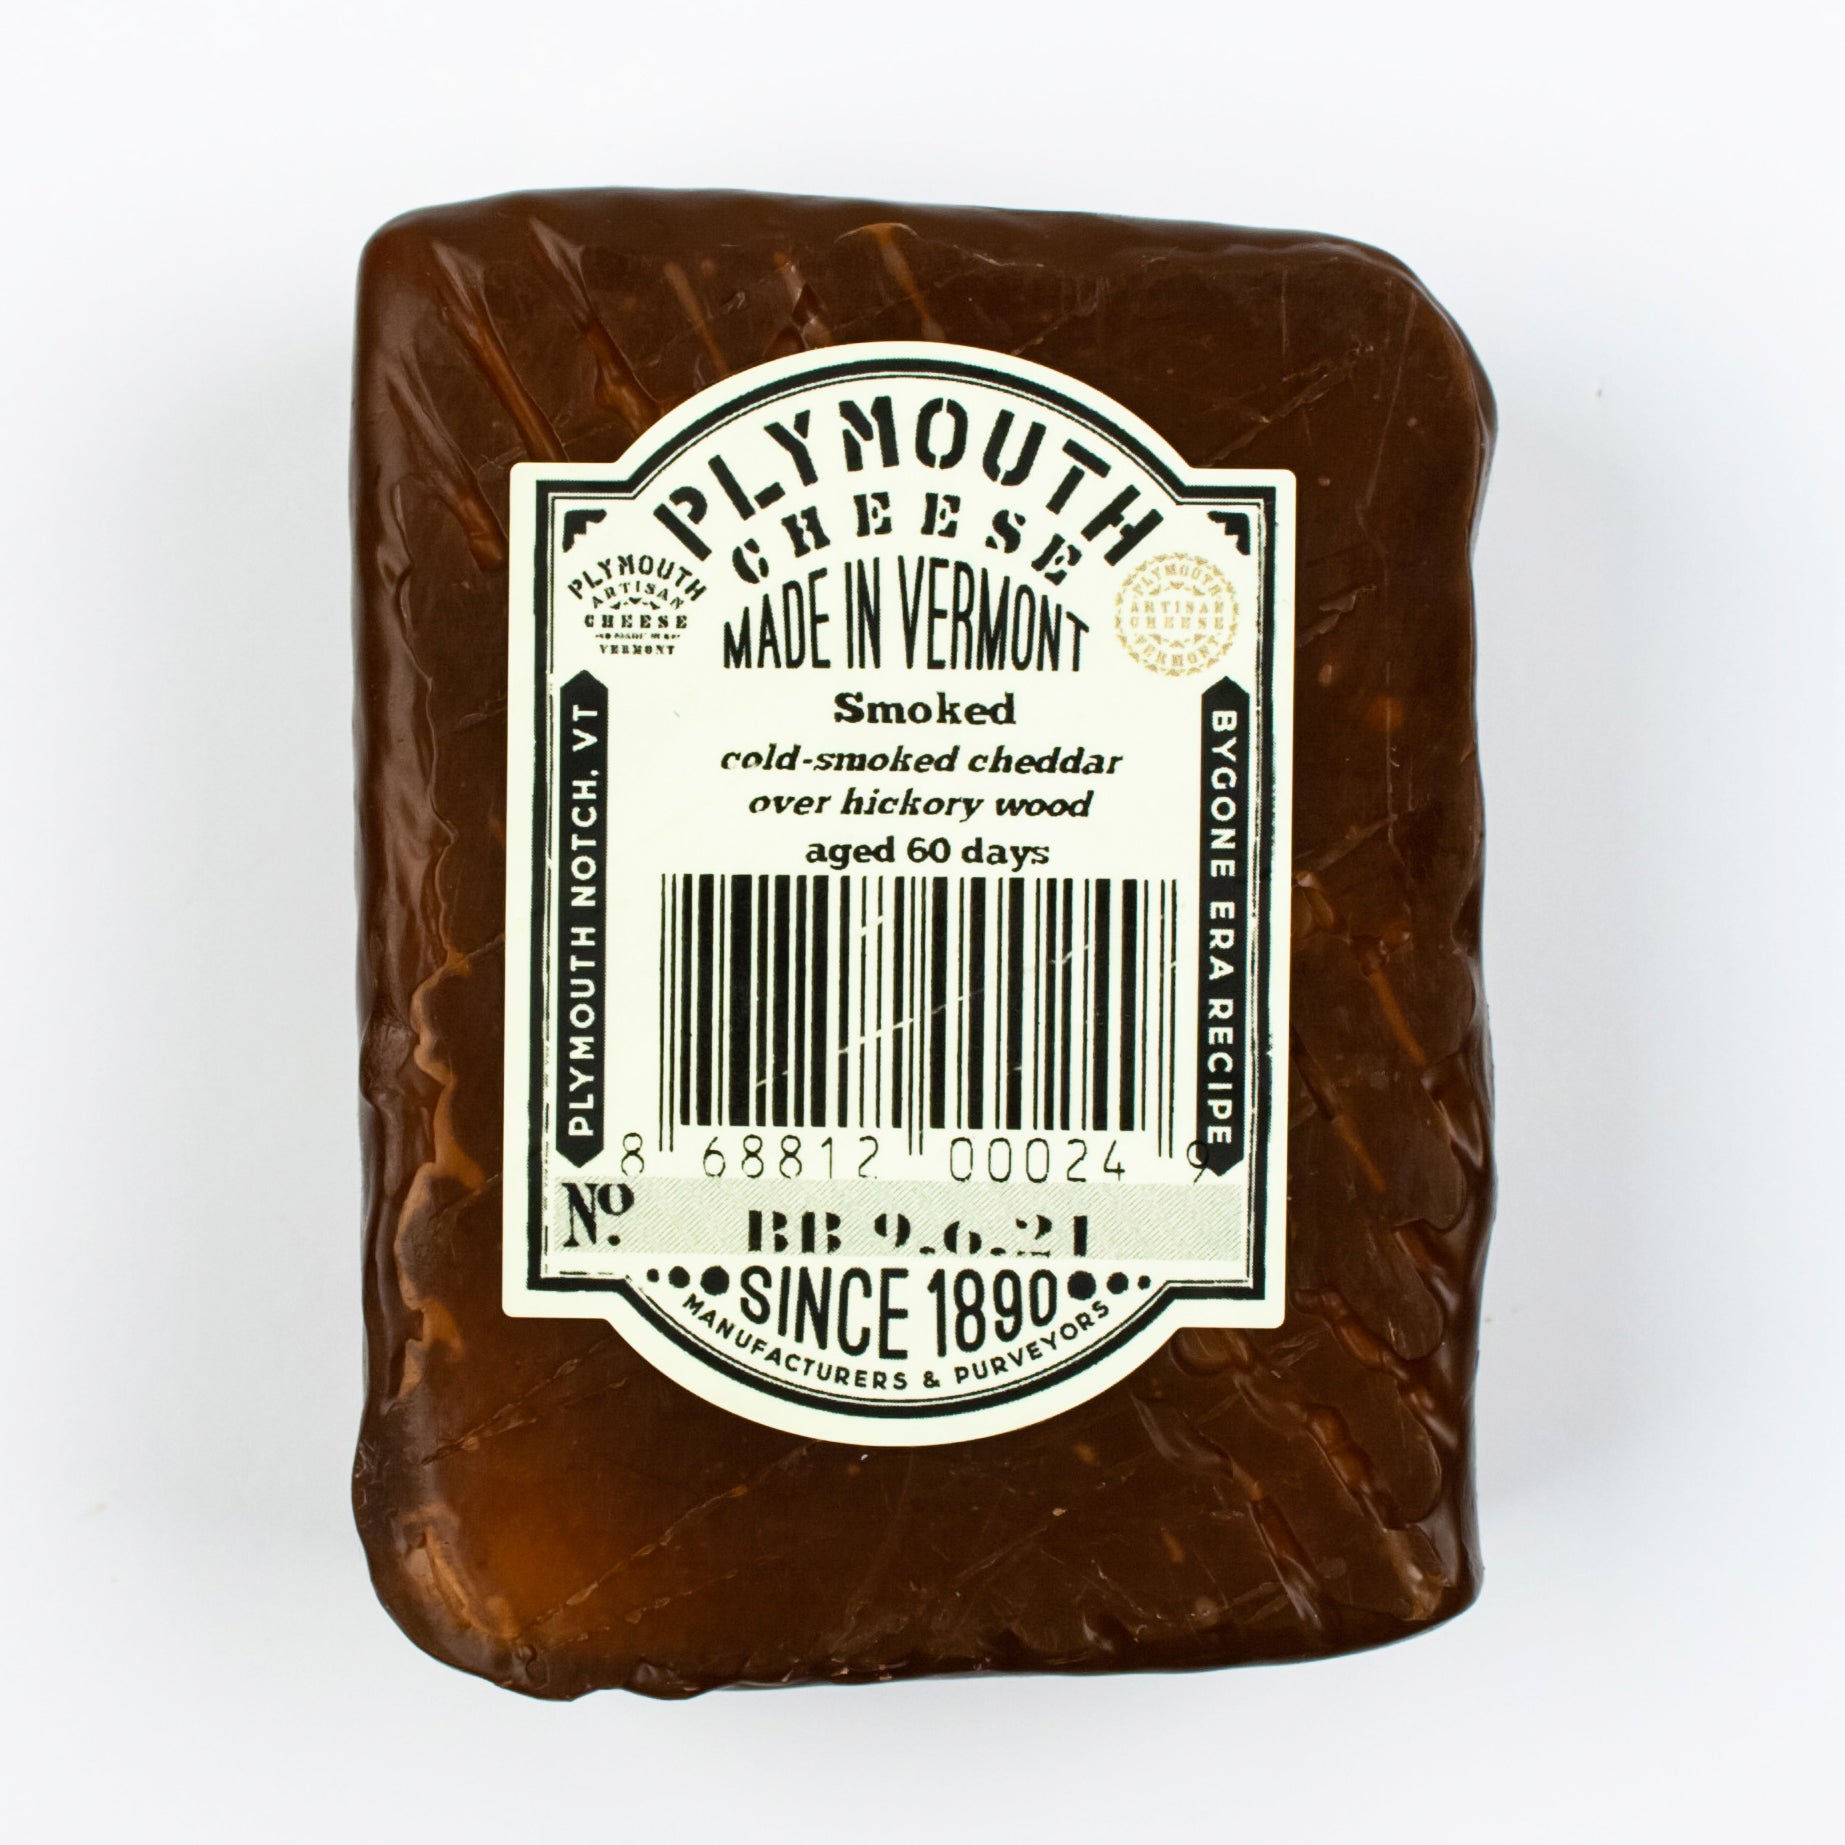 Smoked Cheddar Cheese_Plymouth Artisan Cheese_Cheese